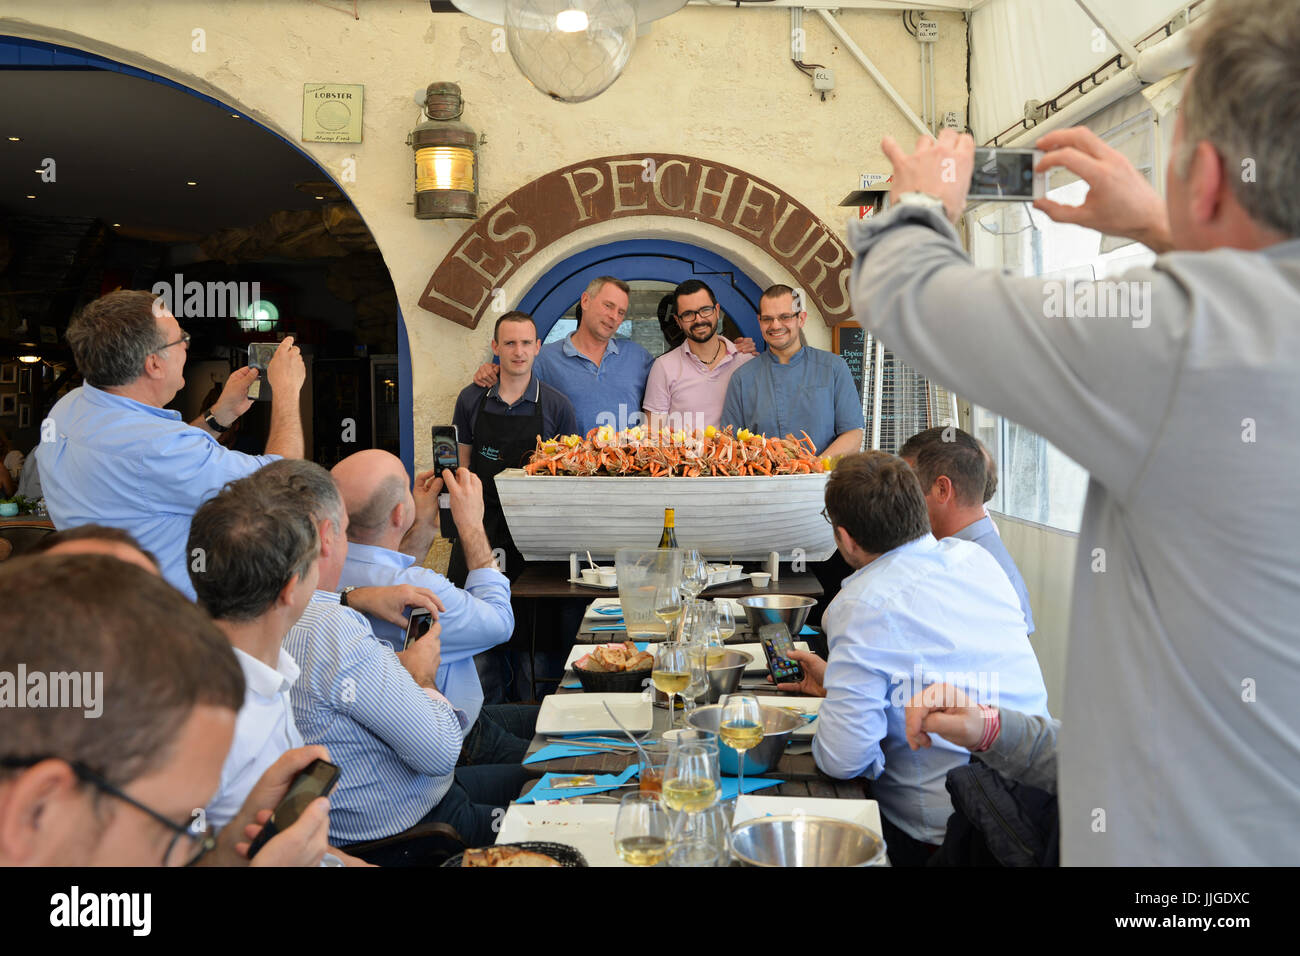 punters take pictures of chefs who have delivered a boatful of seafood to table Stock Photo